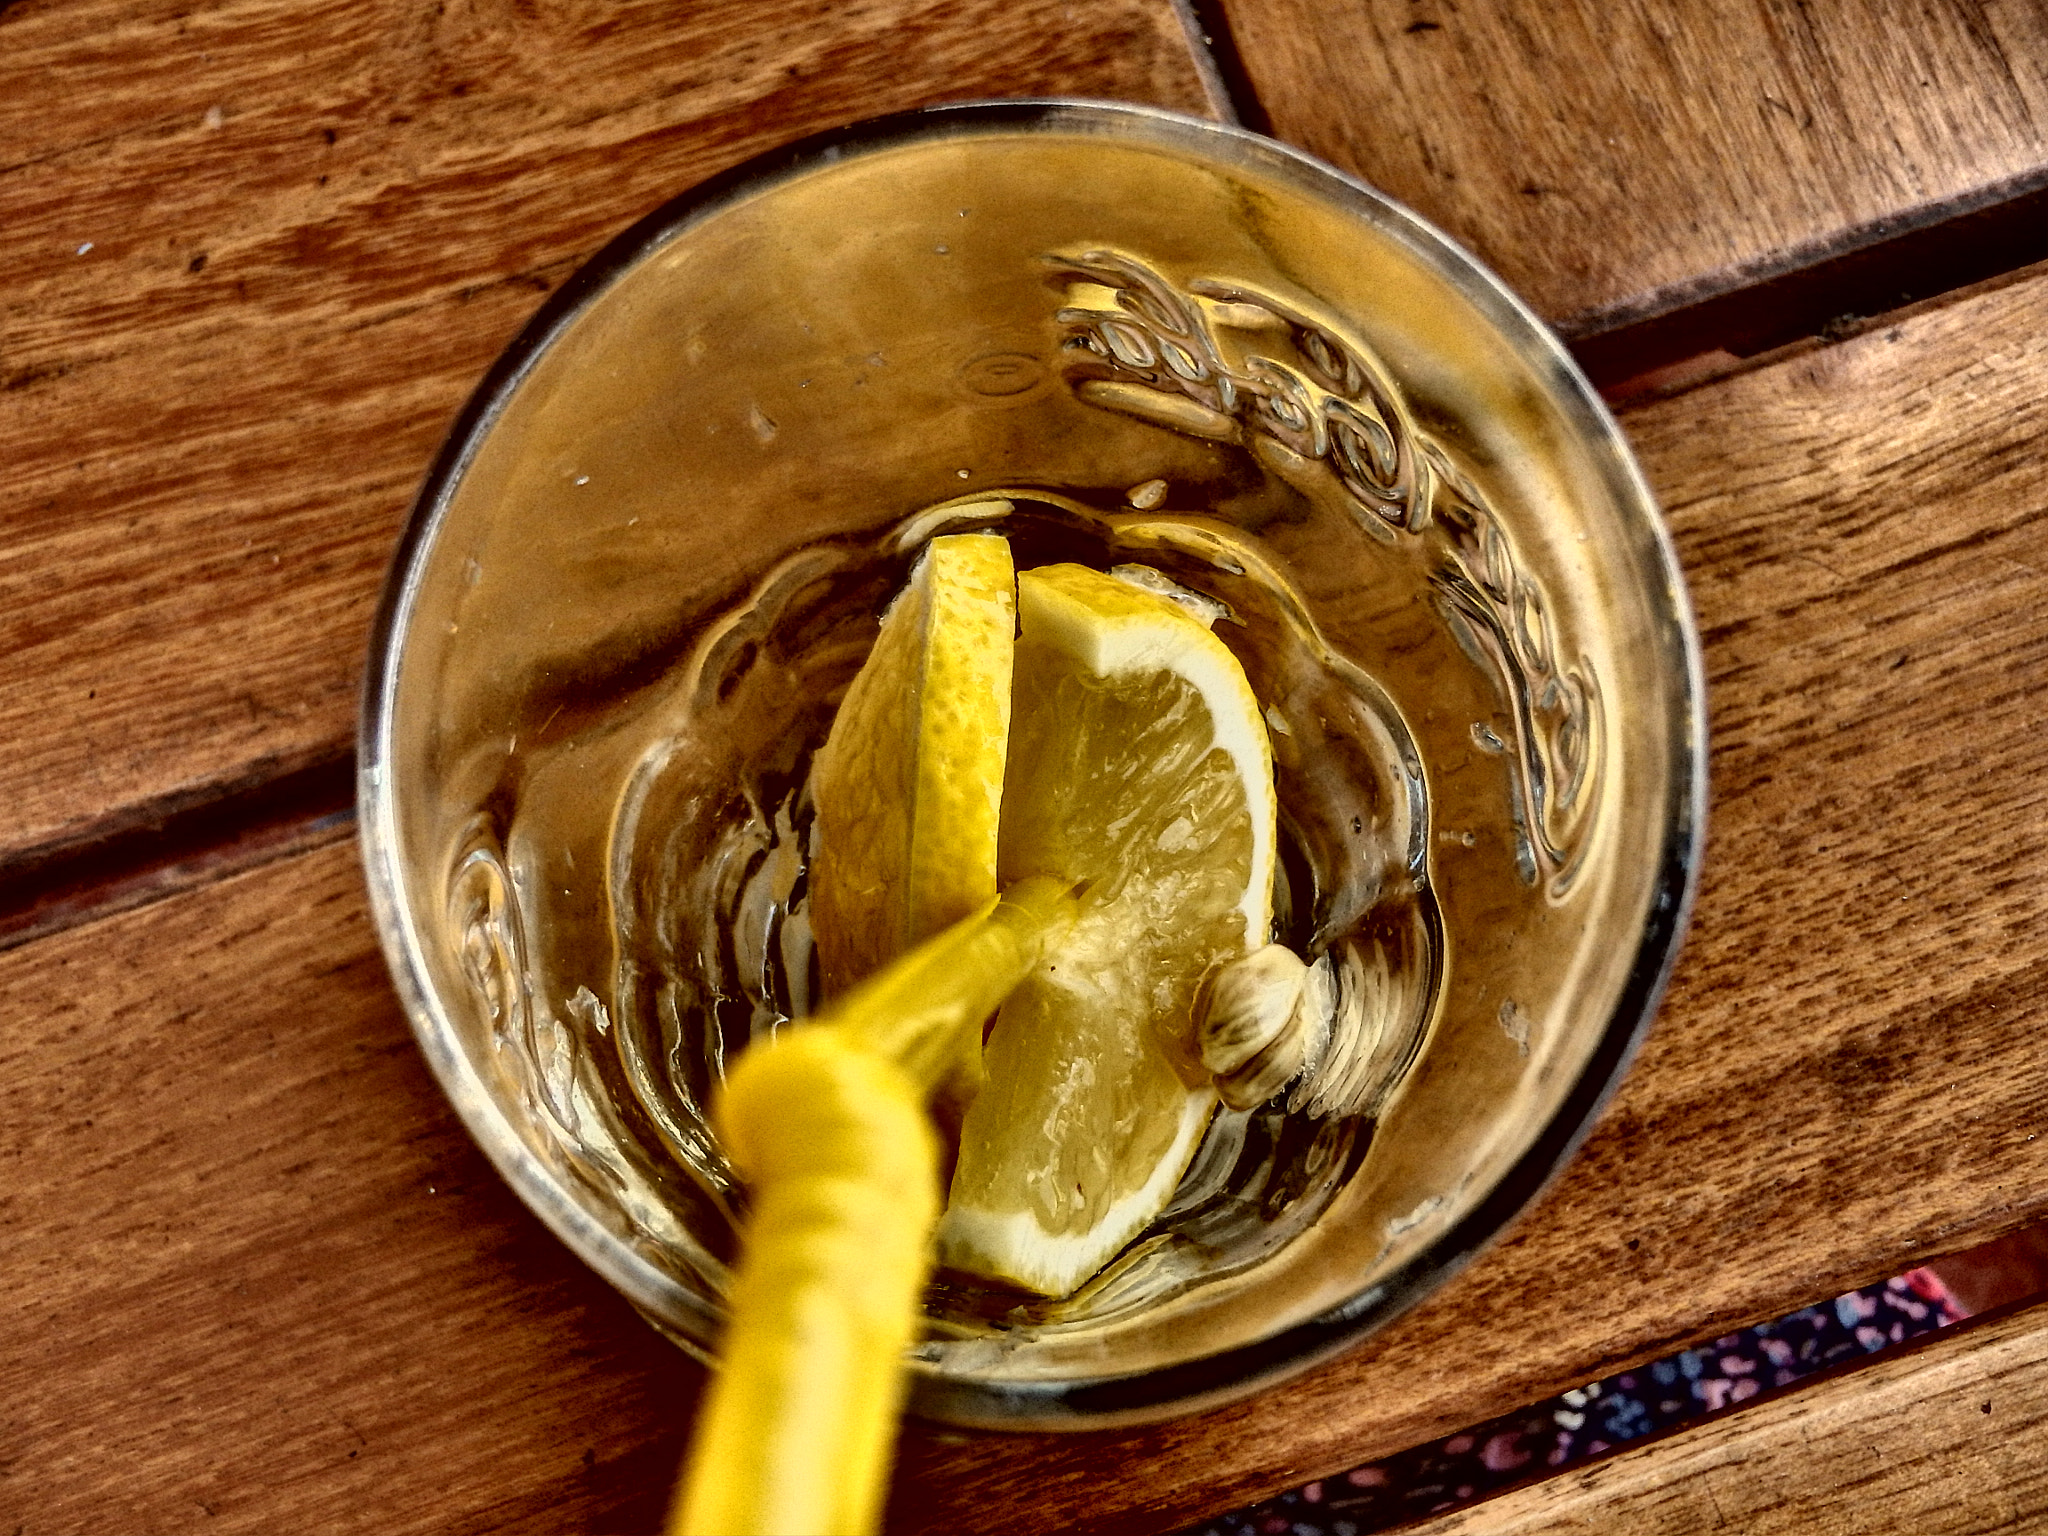 Olympus TG-830 sample photo. Lemons in a glass photography